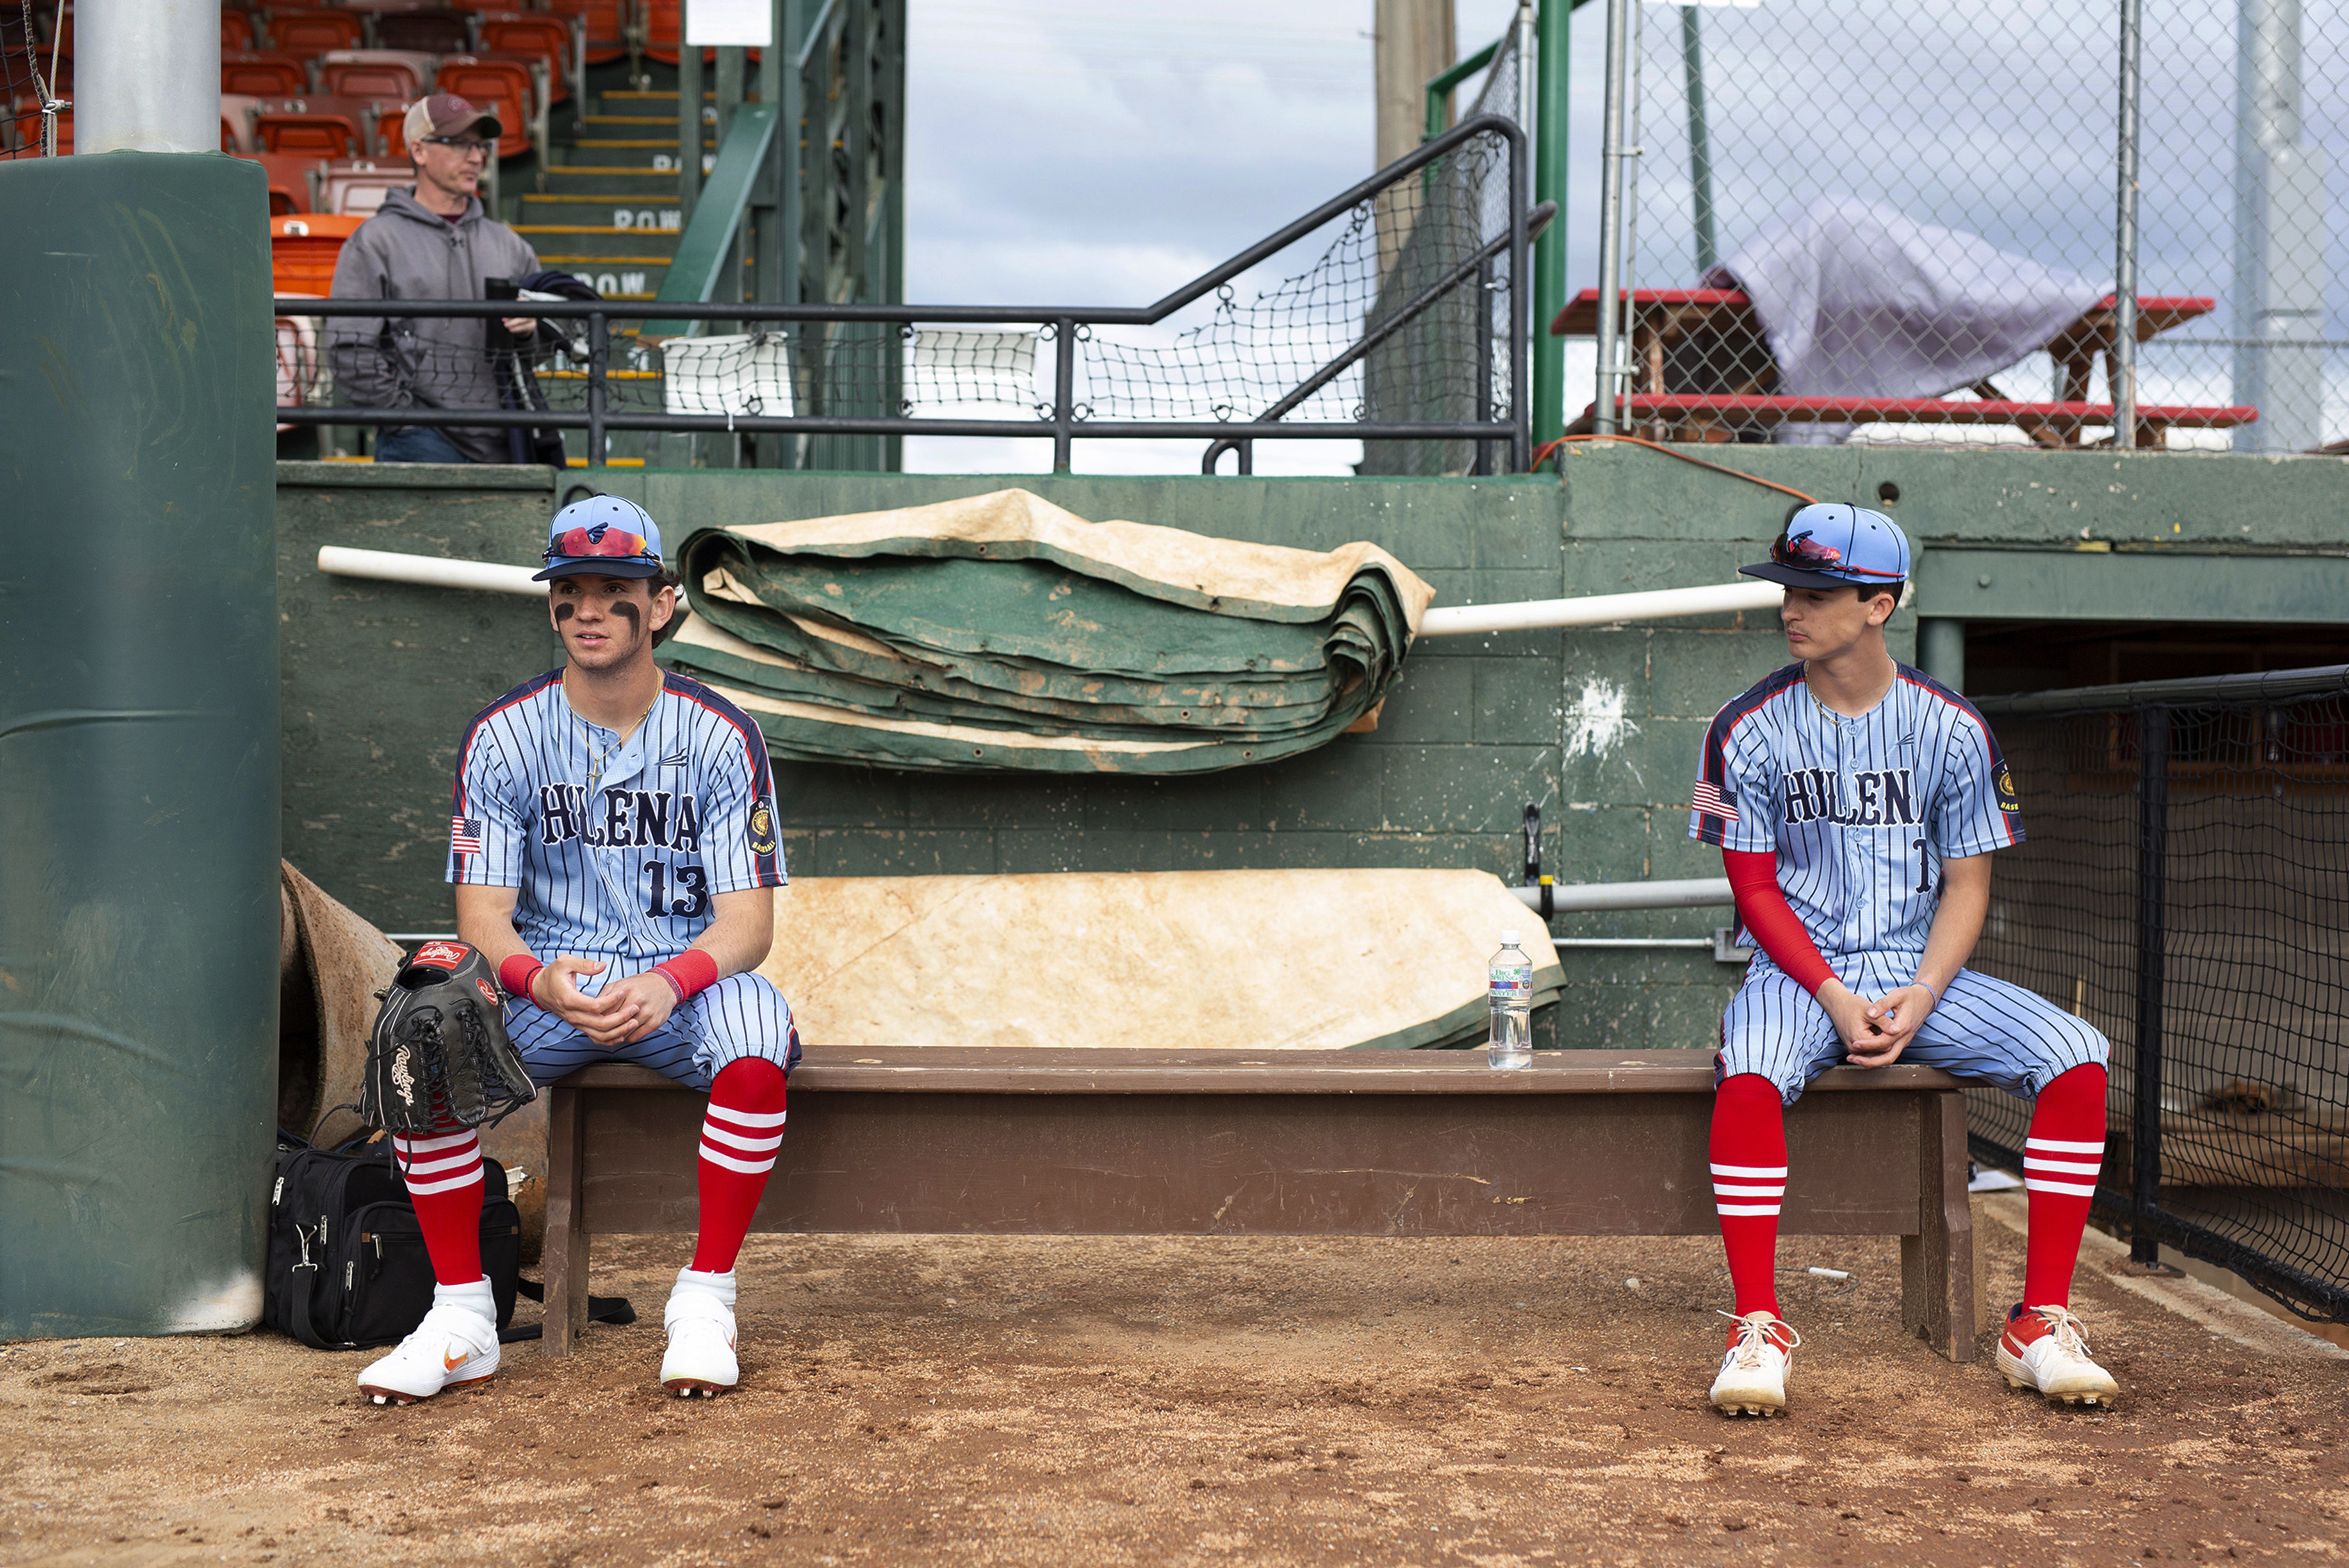 Baseball players in dugout